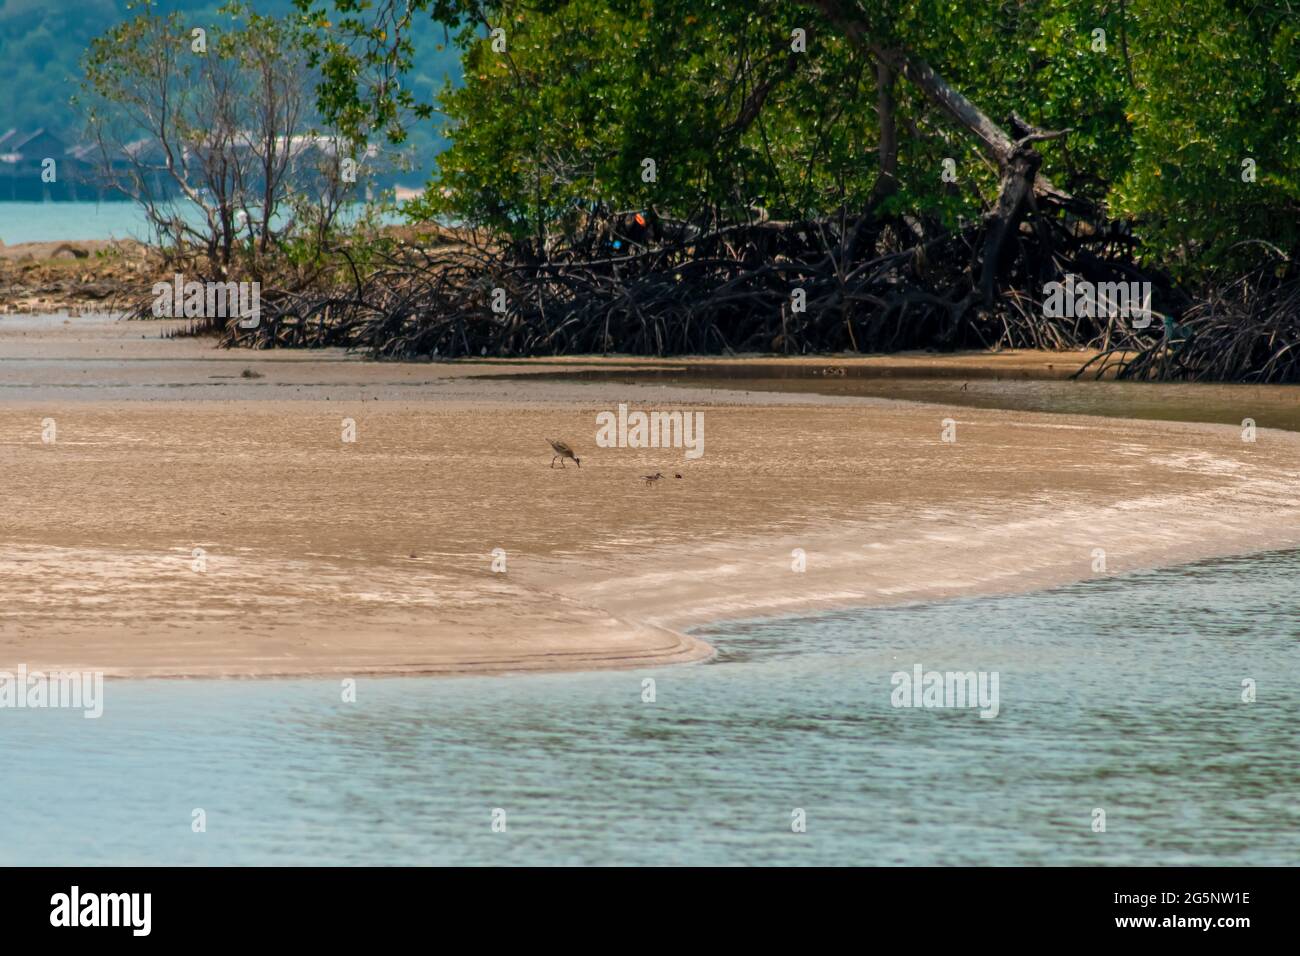 Whimbrel (Numenius phaeopus) wading bird with long beak walking and feeding on the low tide on the sandy beach and mangrove tree forest in the backgro Stock Photo